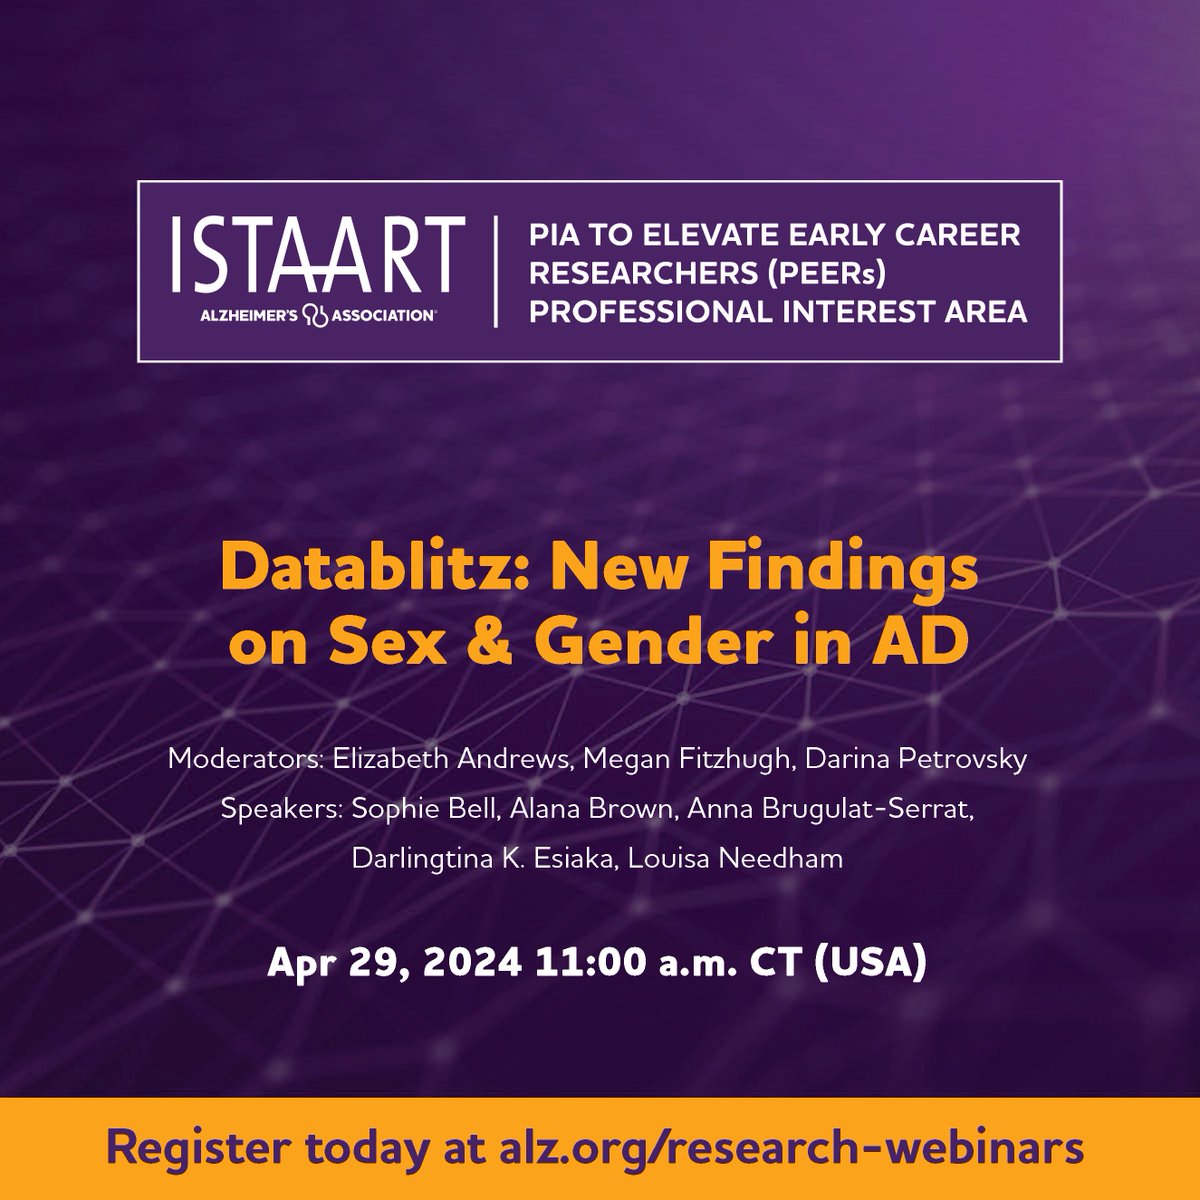 This datablitz-style webinar highlights exciting new findings on sex and gender differences in AD from emerging early career researchers. Topics will feature AD risk factors across the life course, including pregnancy, and caregiving in late life. training.alz.org/research-webin…